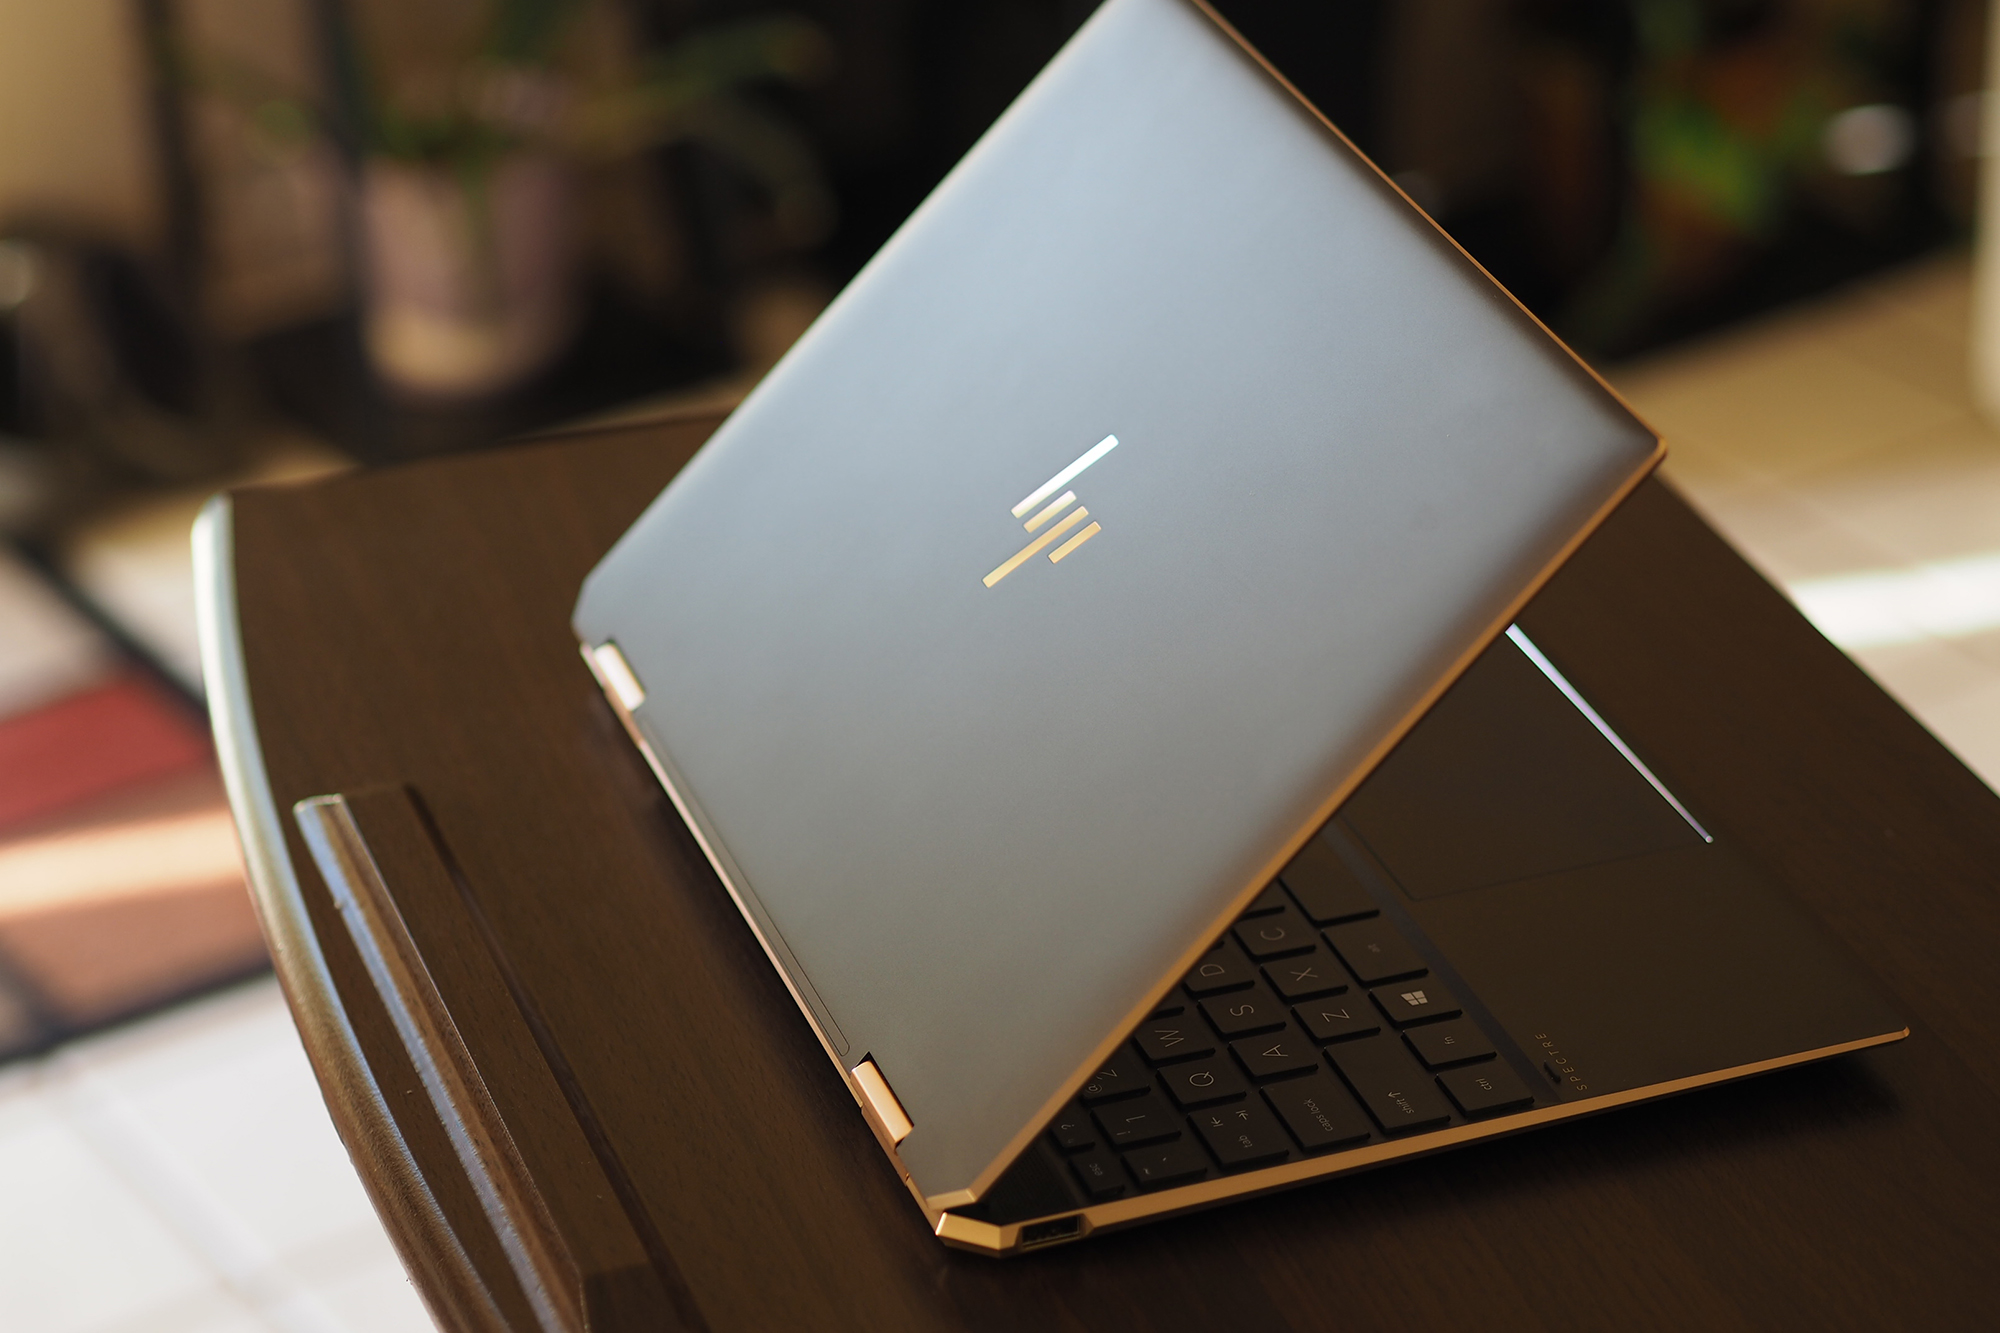 HP Spectre X360 review: The powerful and utilitarian